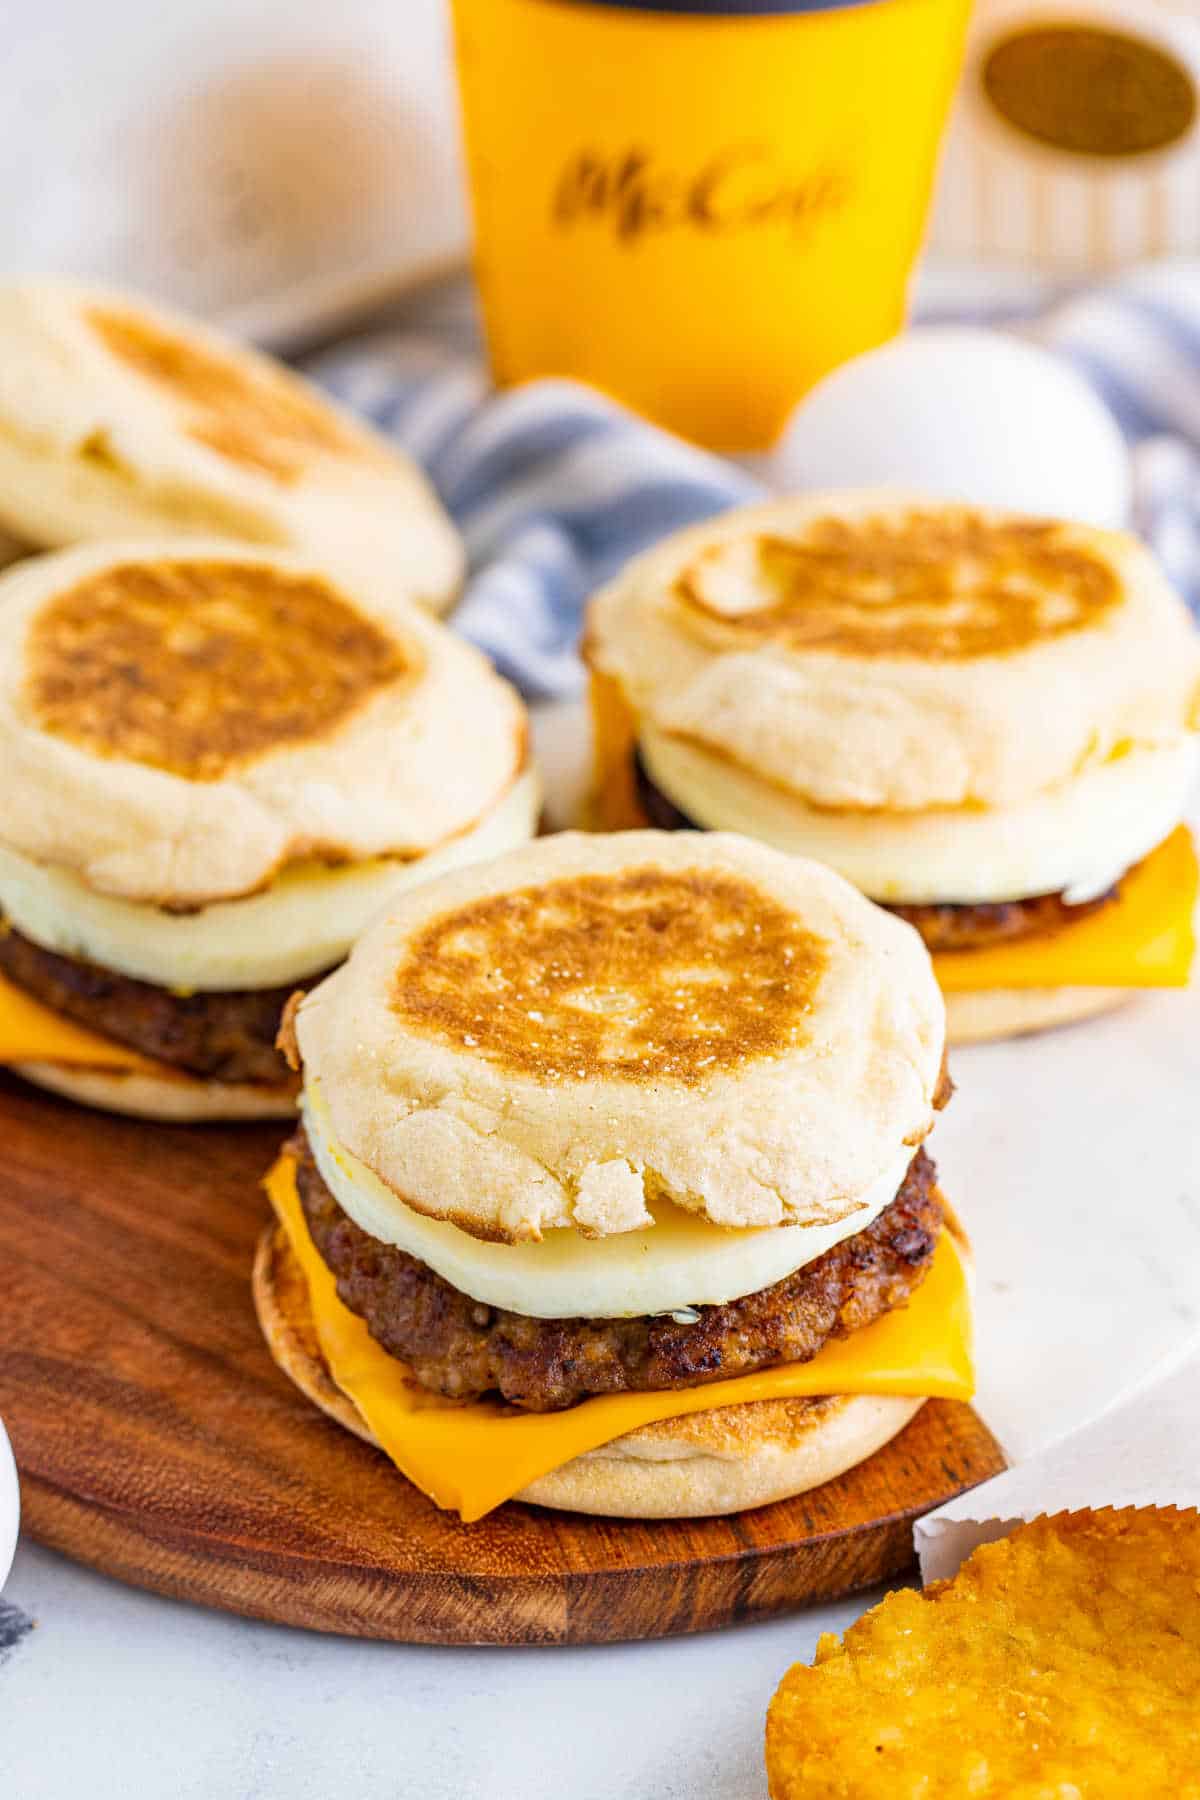 Three copycat McDonald's sausage egg McMuffins on a wooden surface.